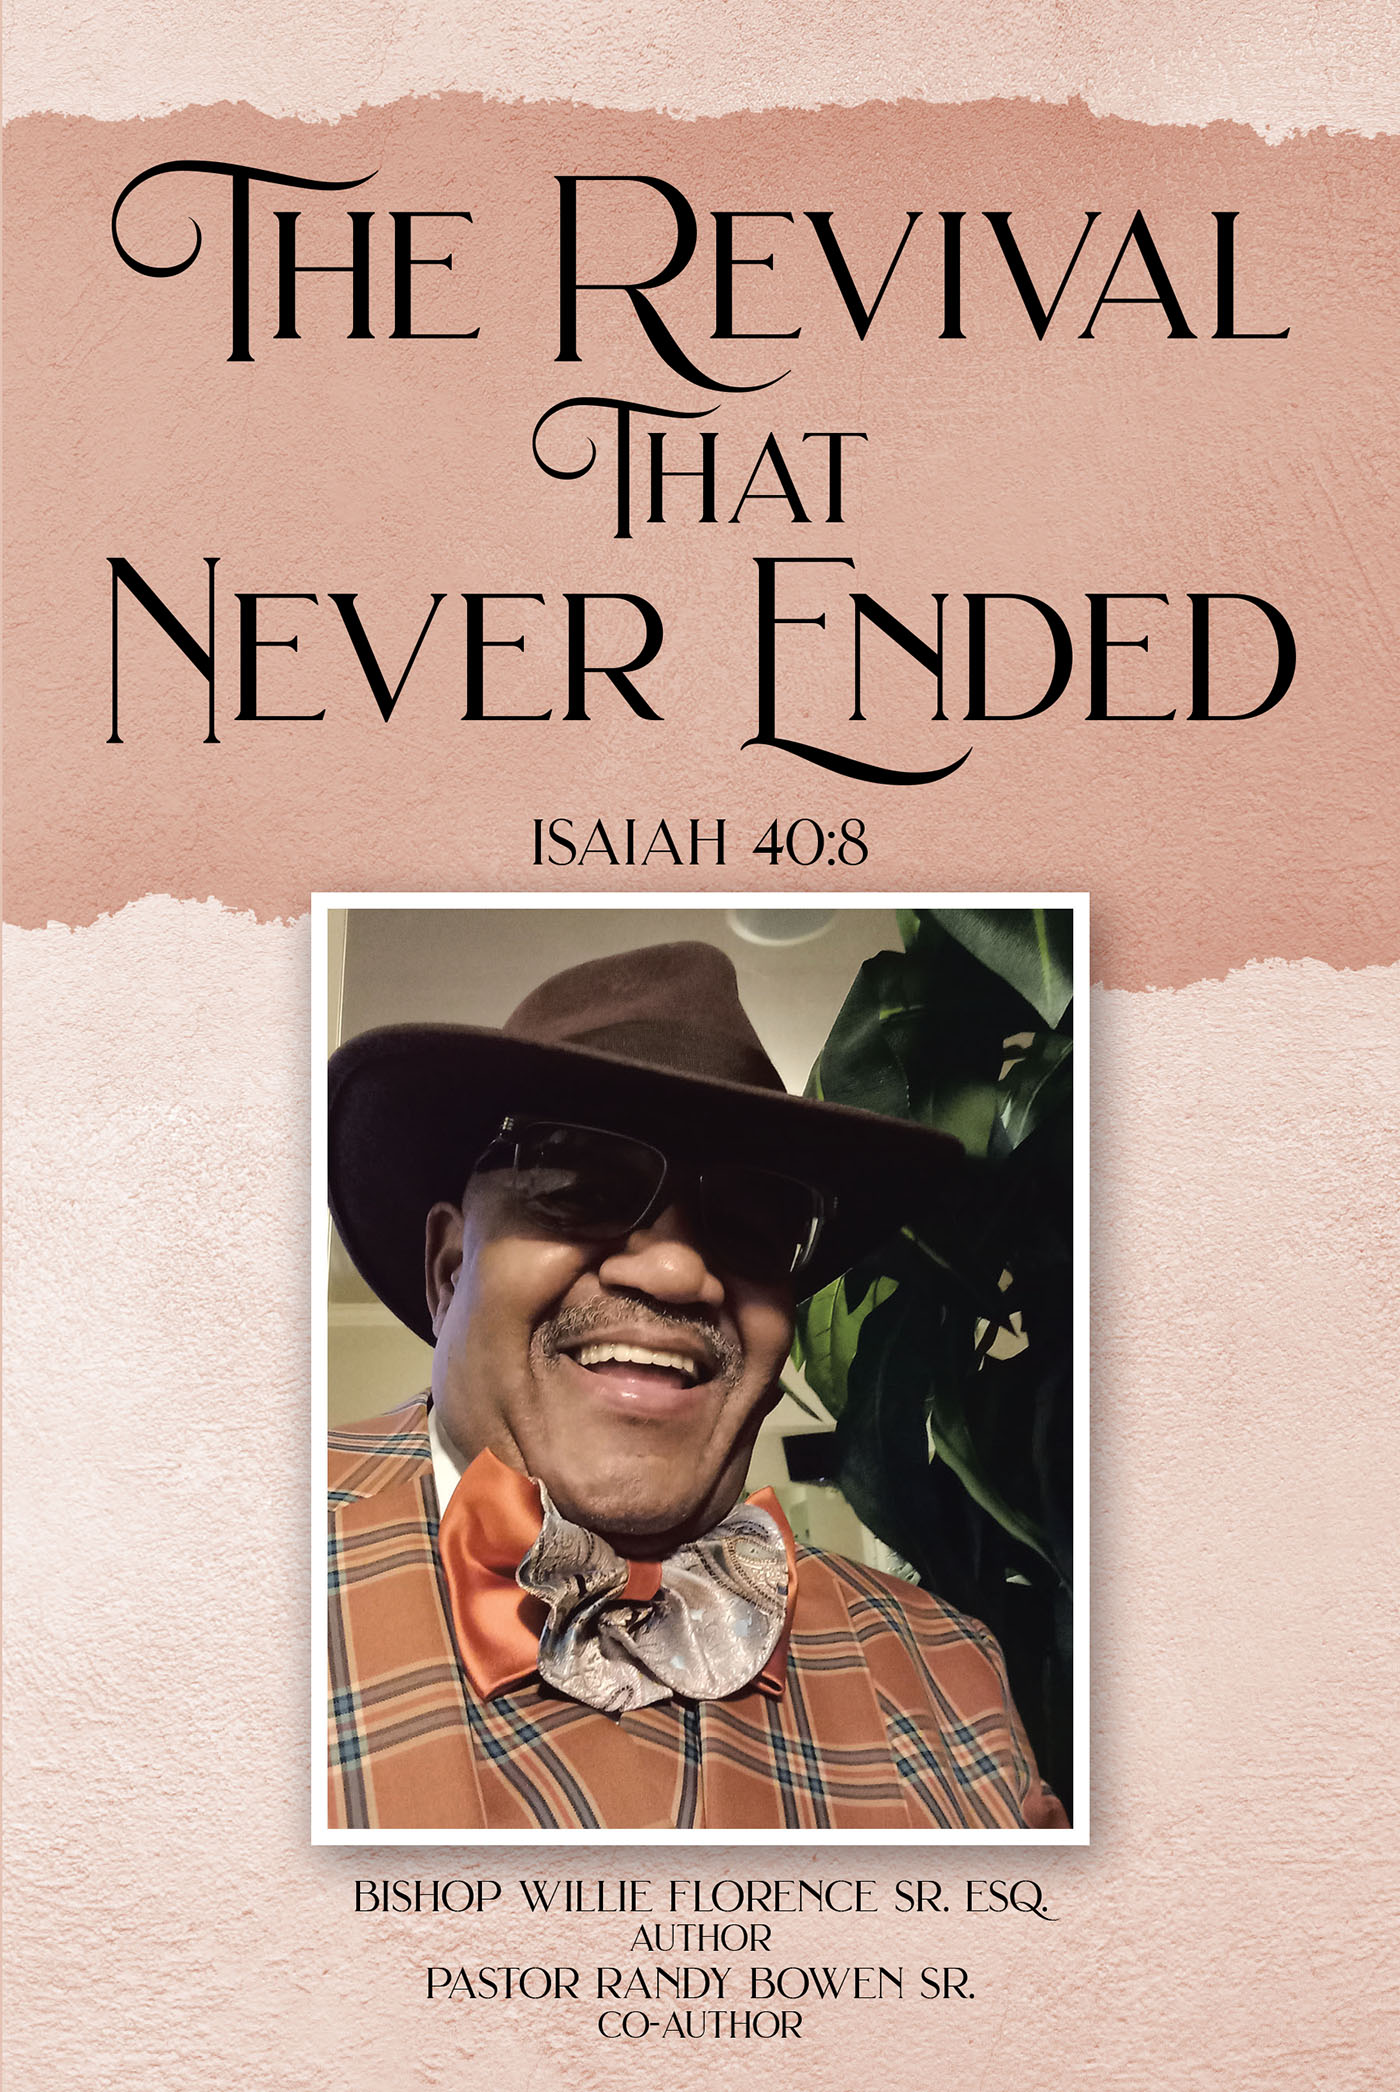 Willie Florence Sr’s Newly Released "The Revival That Never Ended" is a Powerful Account of an Impactful Revival Experience